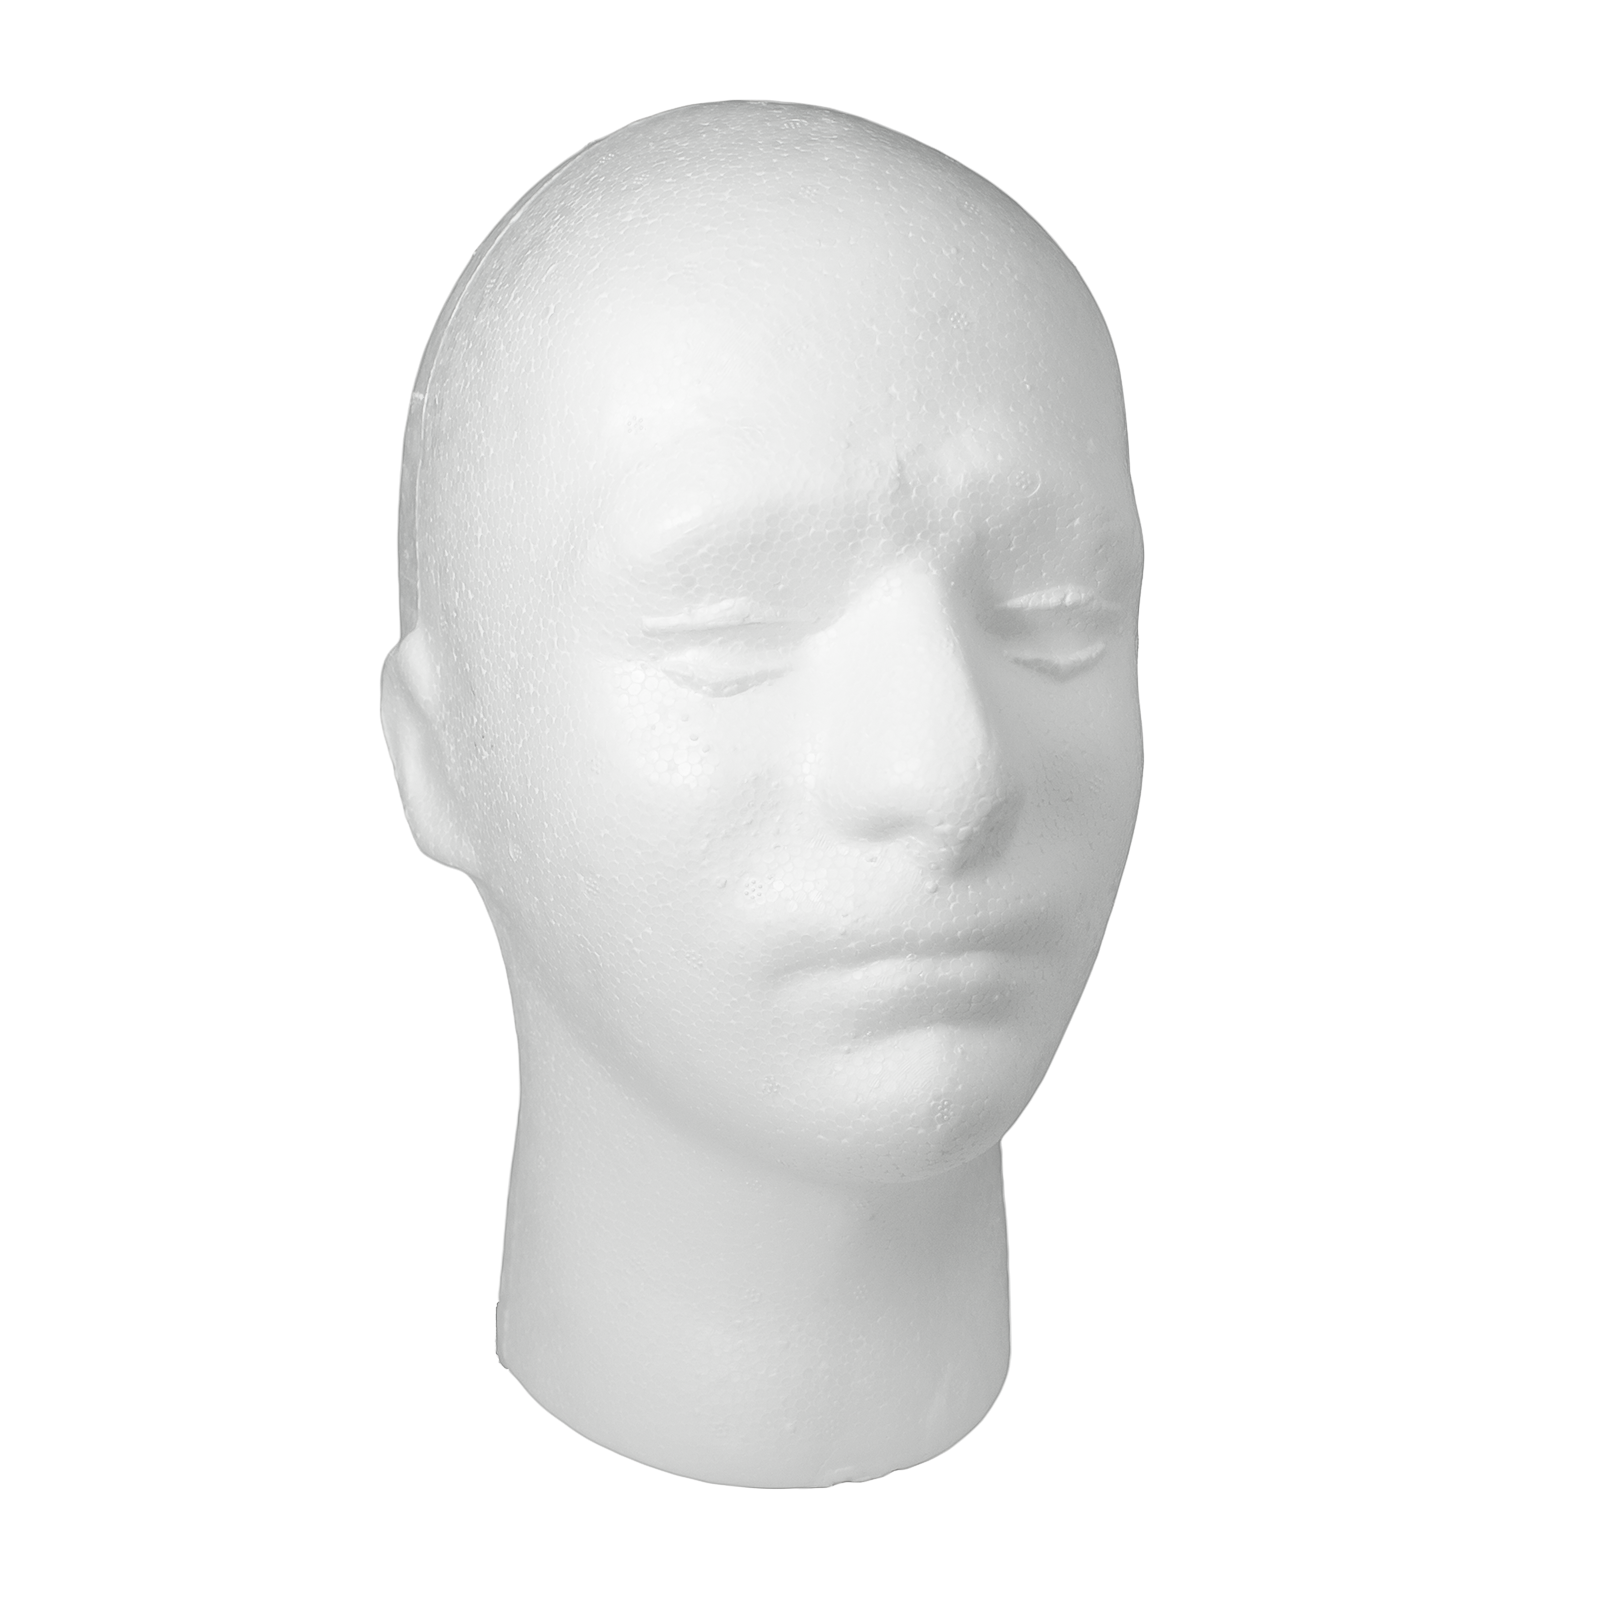 Male Head Polystyrene Mannequin Display for Hats & Headphones (POLYM)